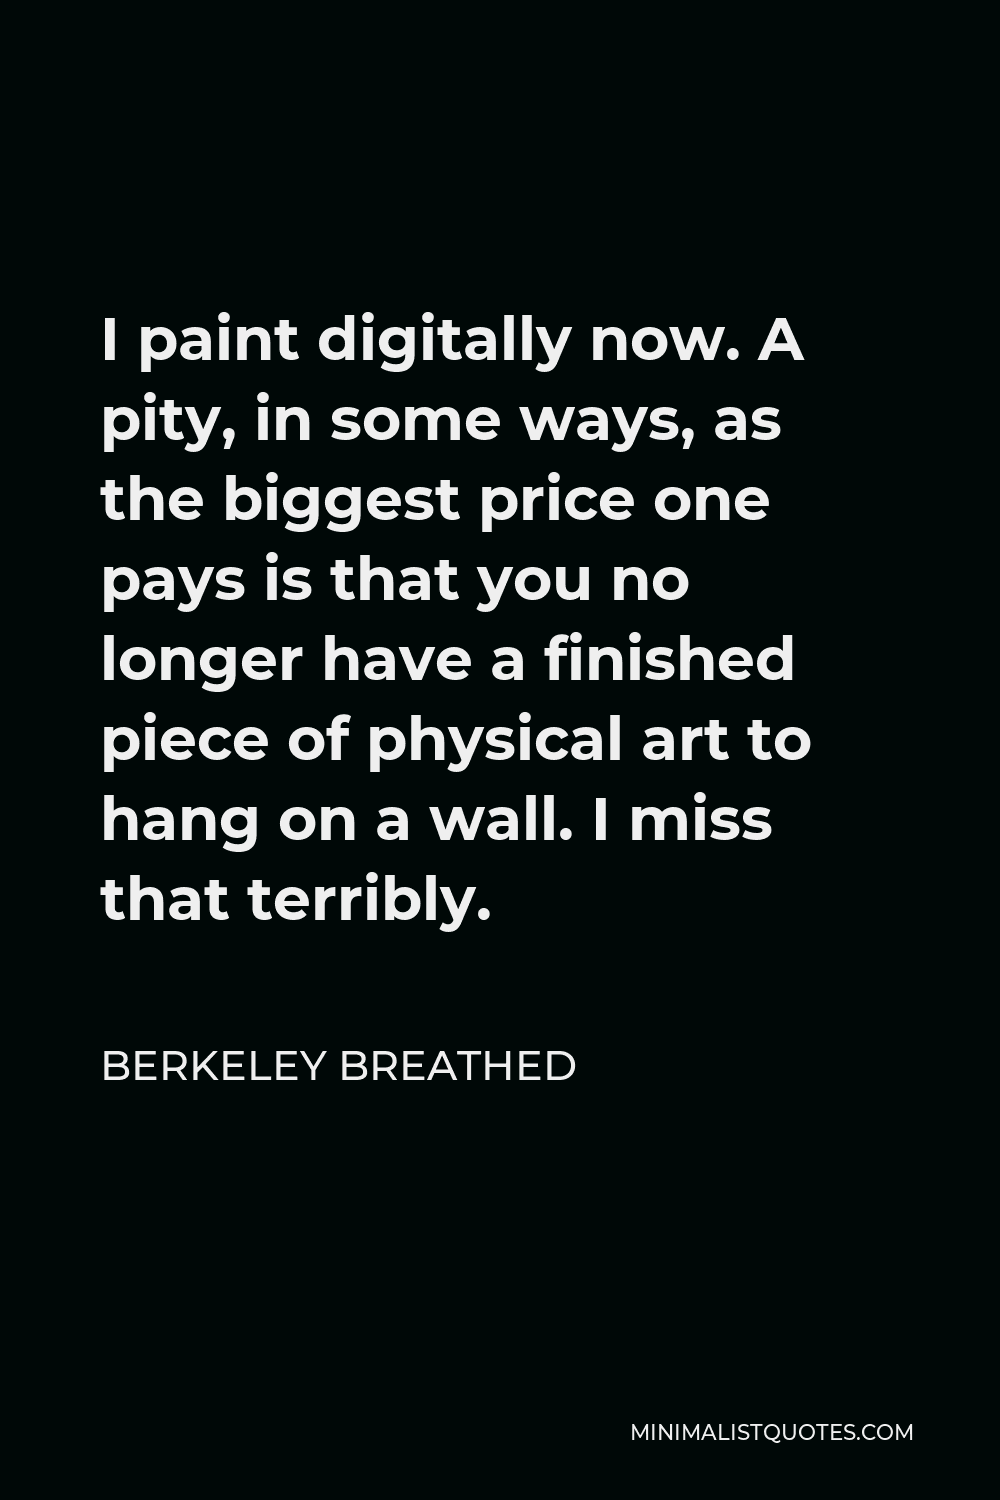 Berkeley Breathed Quote - I paint digitally now. A pity, in some ways, as the biggest price one pays is that you no longer have a finished piece of physical art to hang on a wall. I miss that terribly.